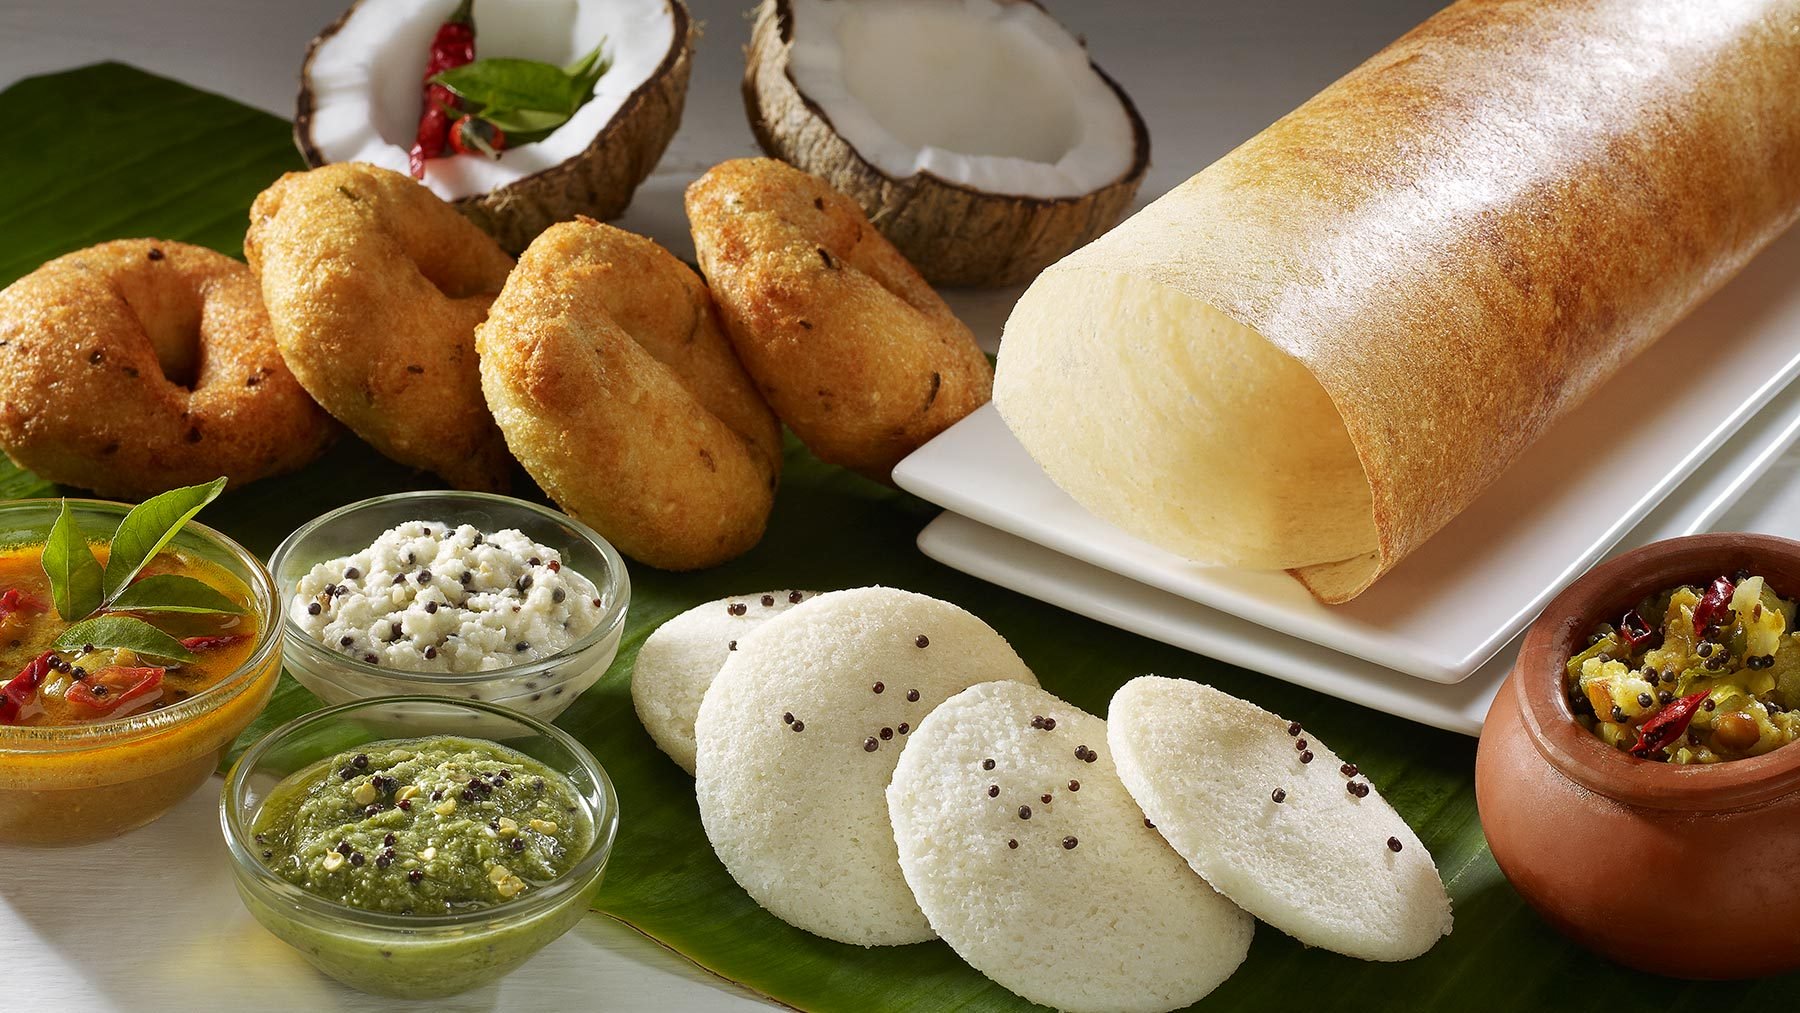 Main Image - Indian Breakfast - Famous Food Of South India - HD Wallpaper 